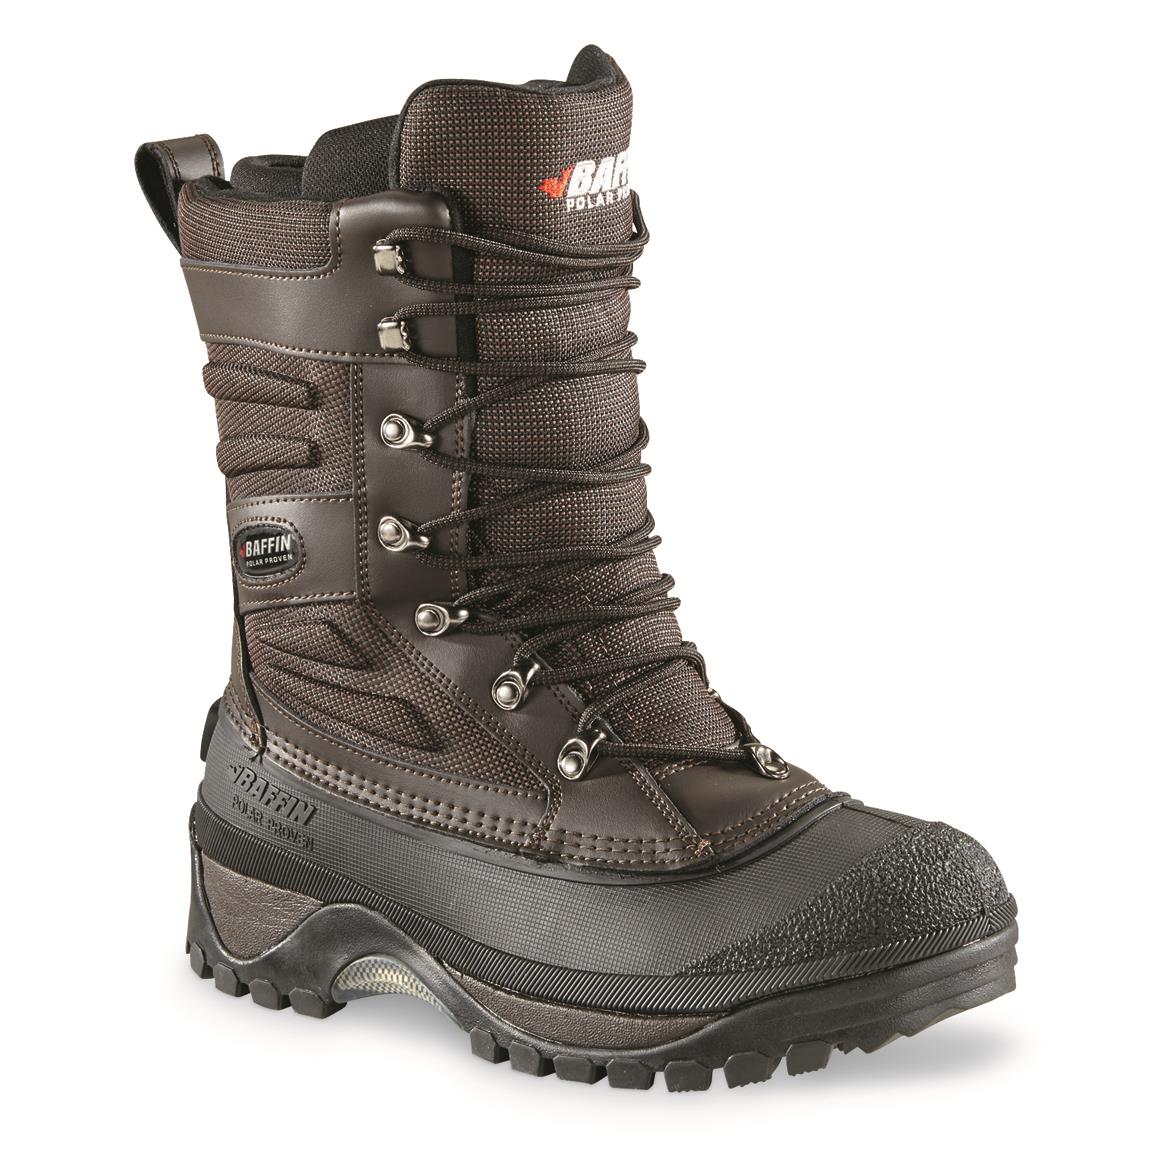 Baffin Men's Crossfire Insulated Boots, Brown